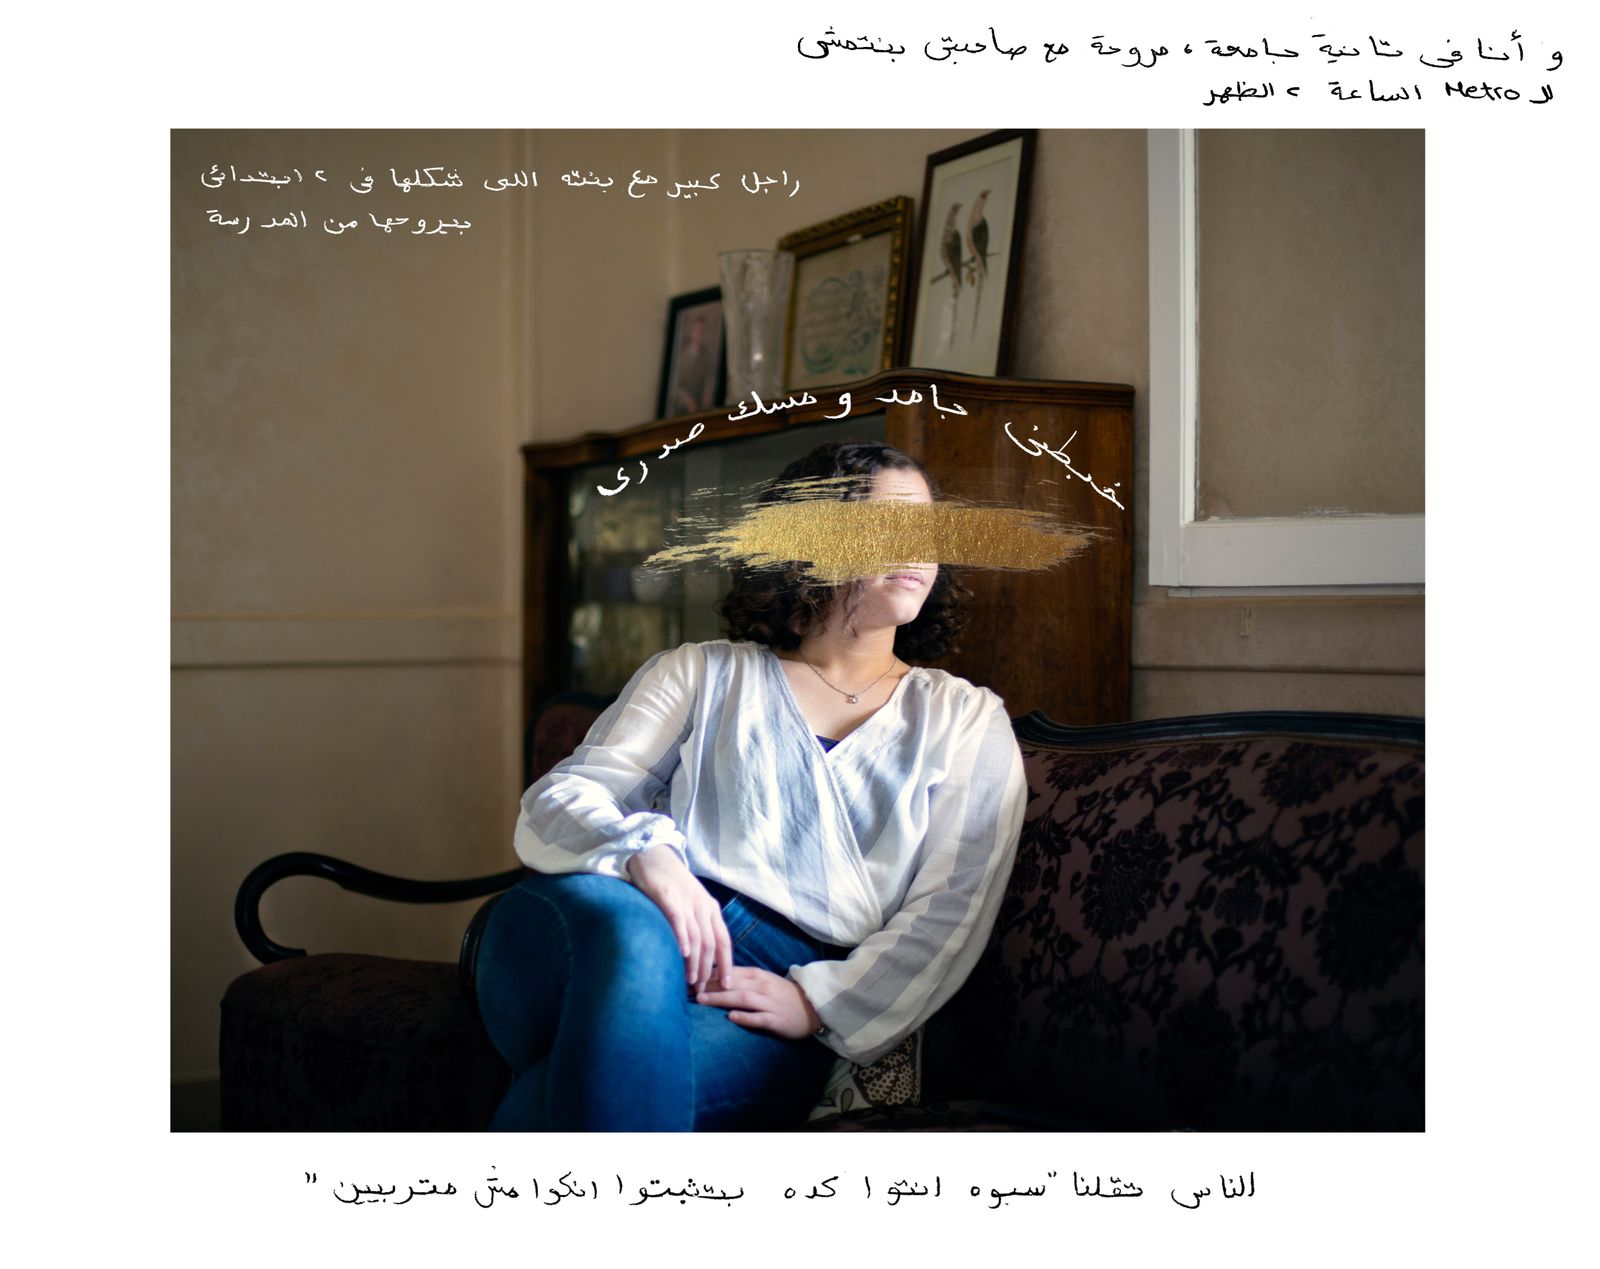 © Lina Geoushy - Image from the Shame Less مش عيب photography project